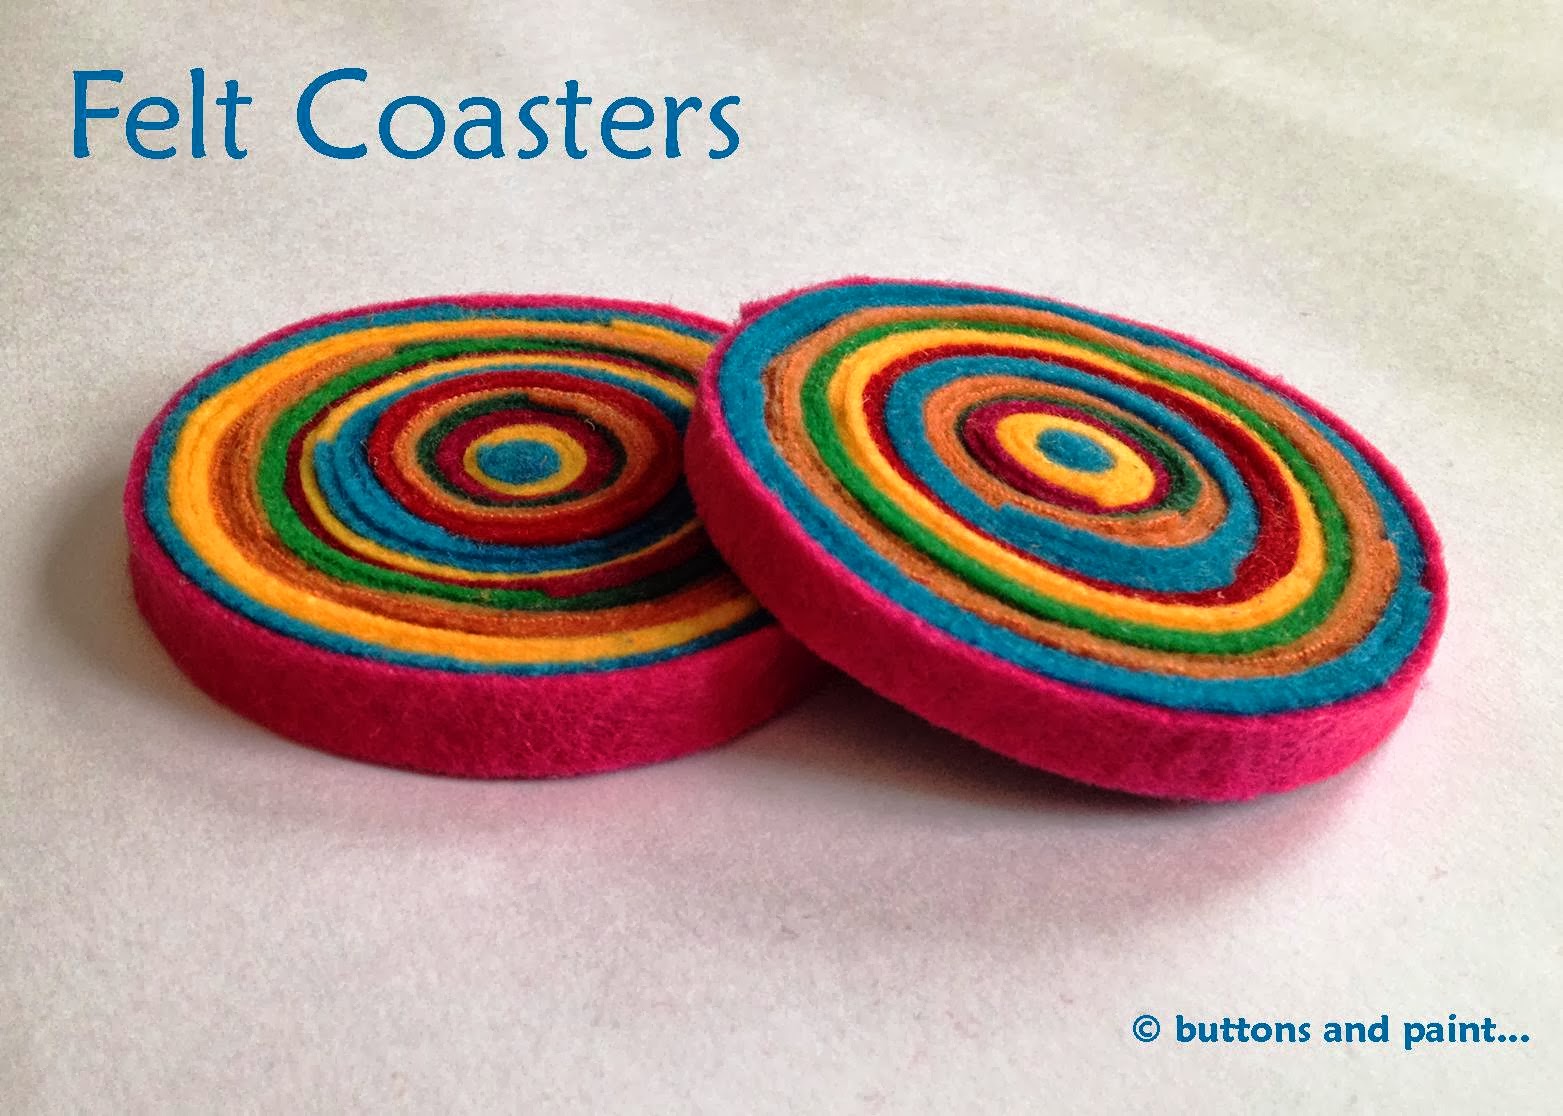 buttons and paint...: ... and some Felt Coasters